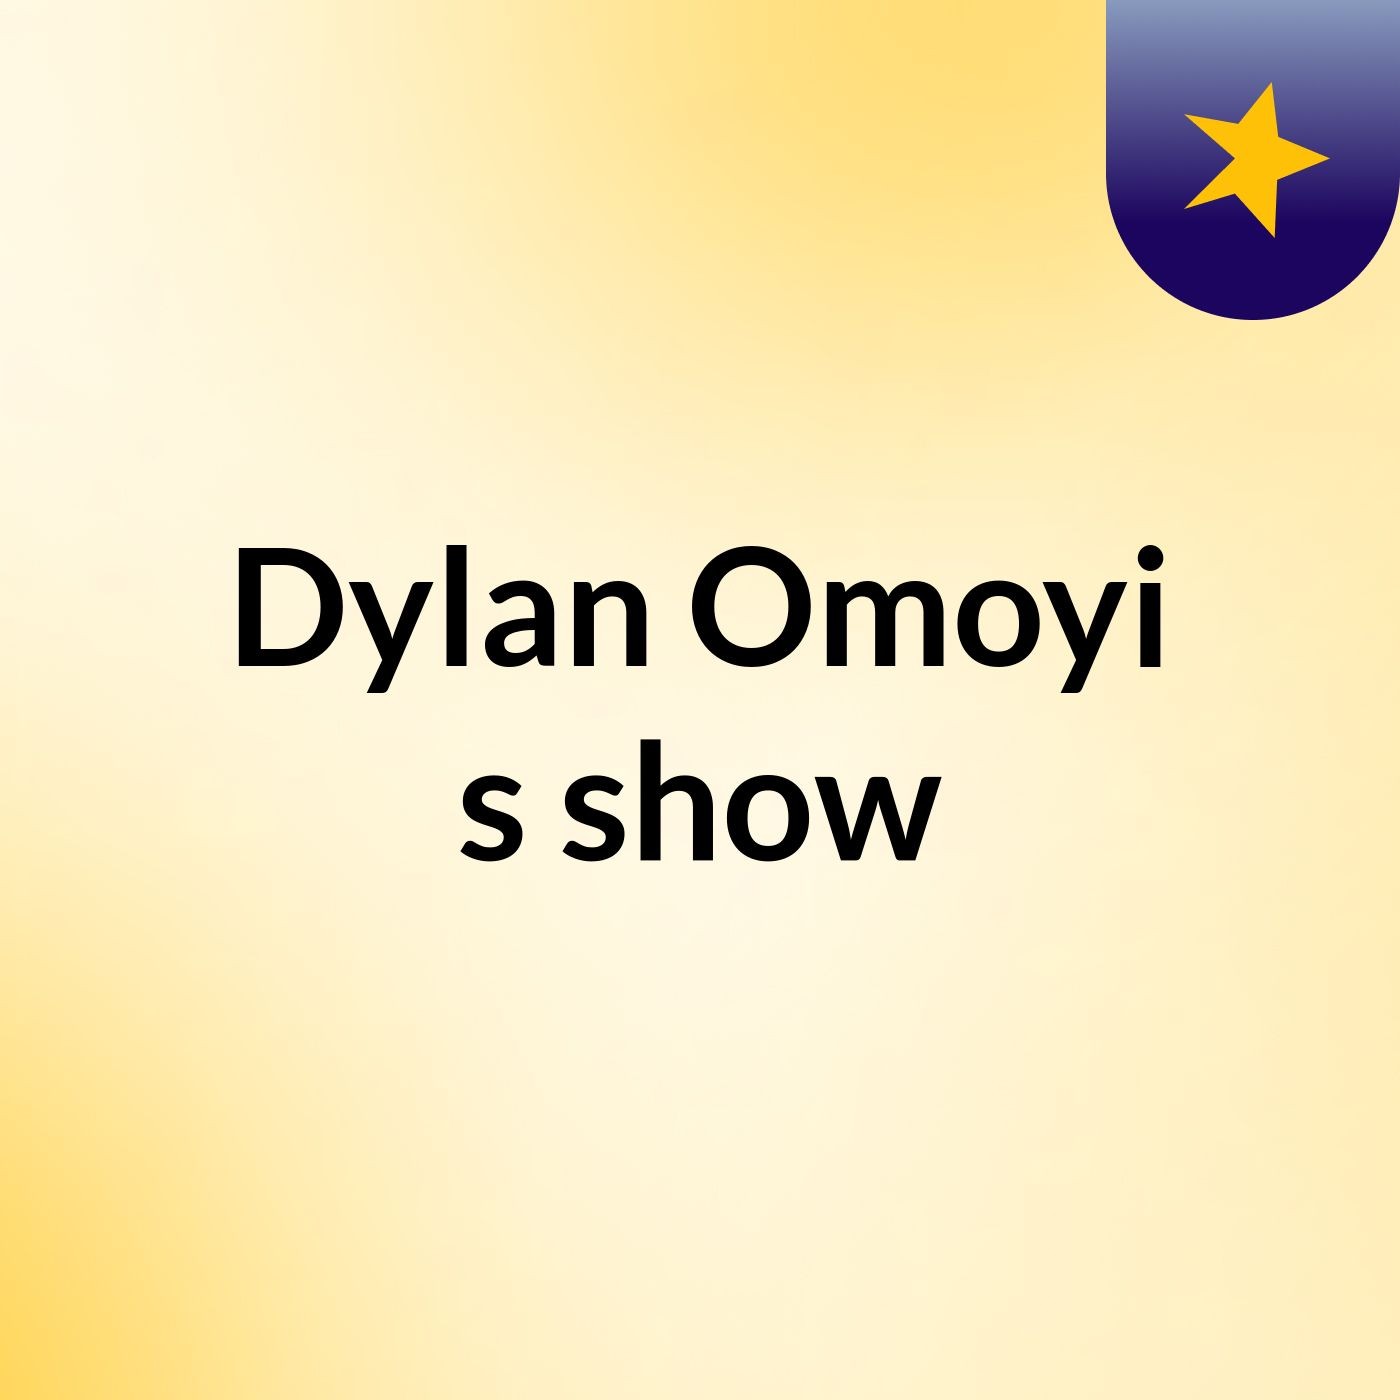 Dylan Omoyi's show